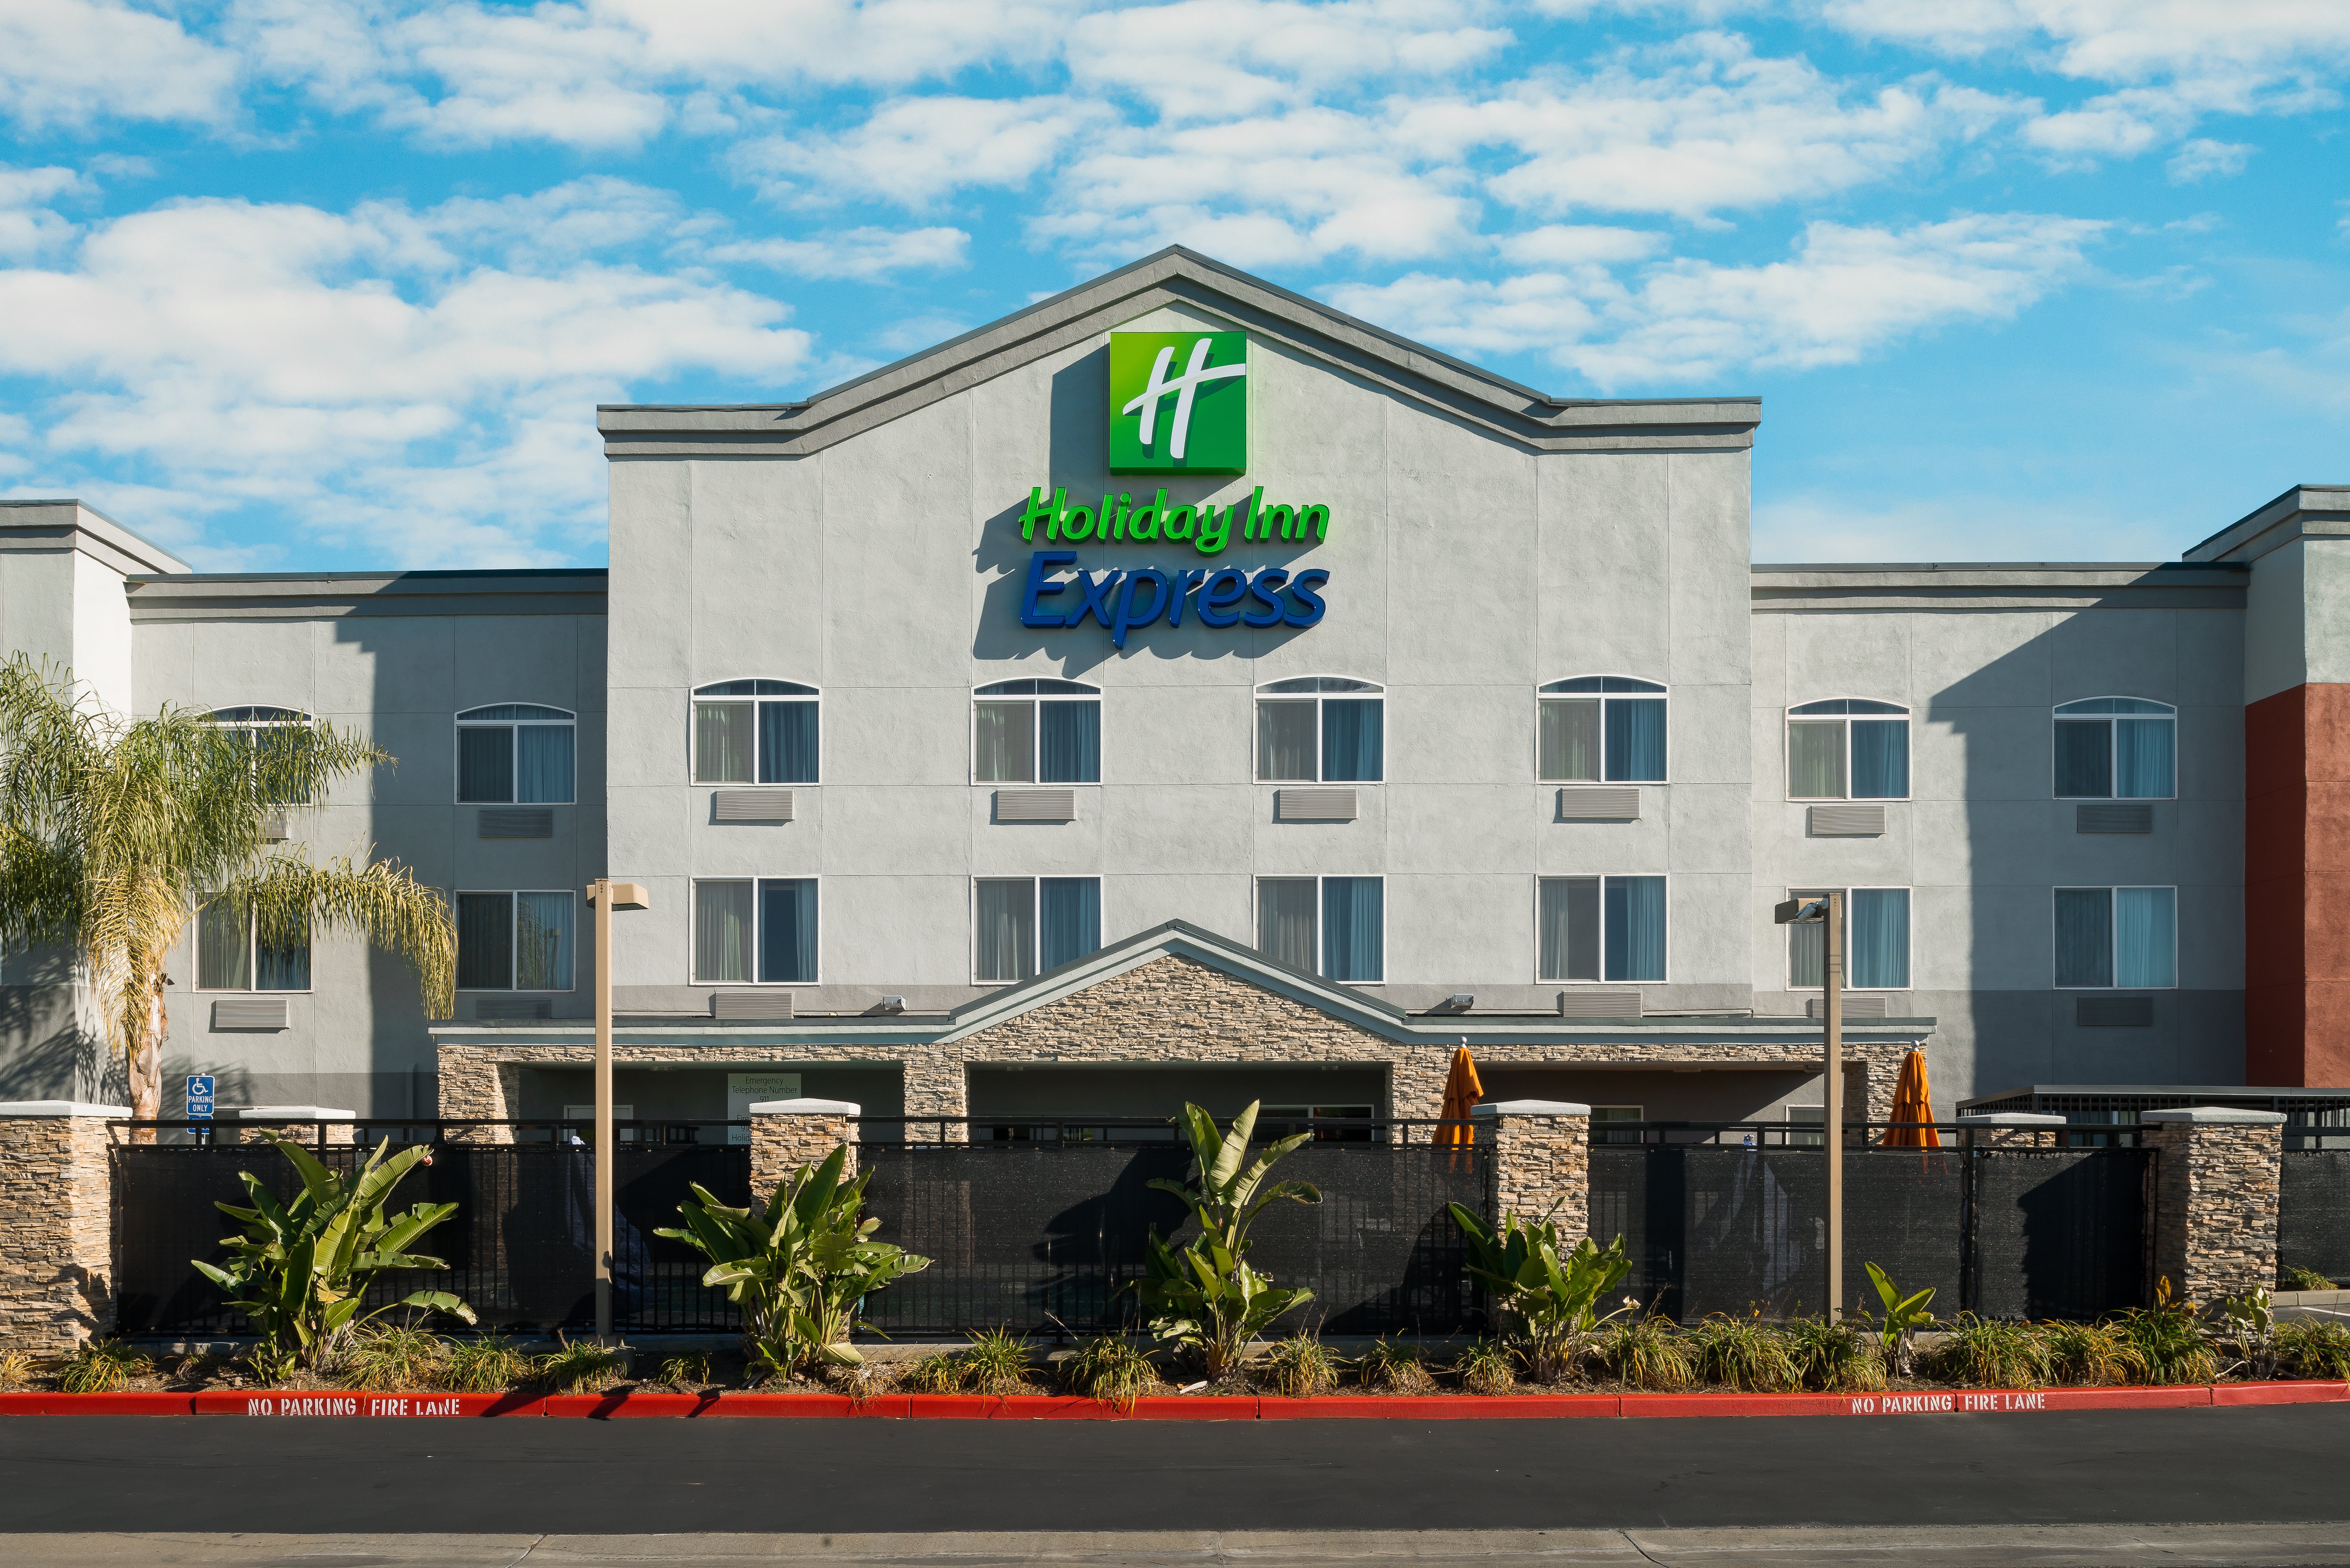 Welcome to the Holiday Inn Express Rocklin-Galleria!